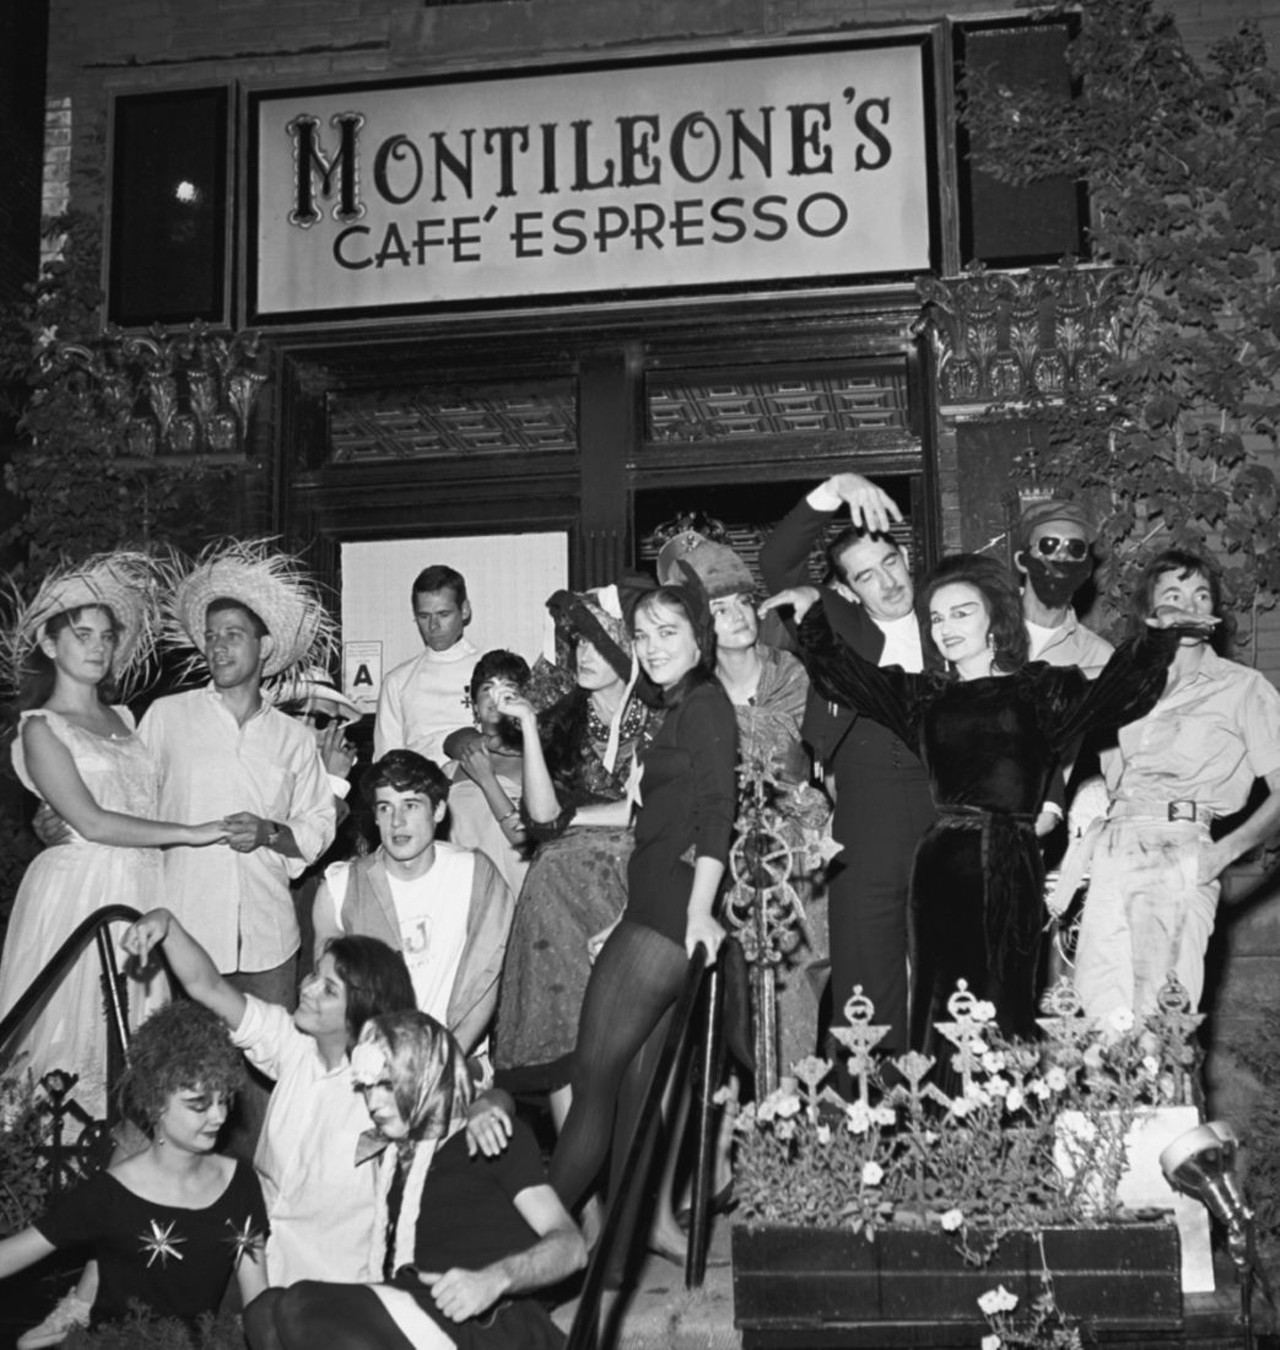 Montileone&#146;s Caf&eacute; Espresso. In the 1950s, Sam Clark opened Montileone&#146;s Caf&eacute; Espresso in the famed St. Louis Gaslight Square District. He named the caf&eacute; after the popular Gaslight Square artist Ralph Montileone, who was reportedly one of his lovers. It was one of the first coffee shops in St. Louis to have an espresso machine. &#147;It was $800, and we thought we would die,&#148;Clark said during a radio interview. &#147;We nearly hocked our souls in order to pay for the darn thing.&#148; (Courtesy of State Historical Society of Missouri, St. Louis.)